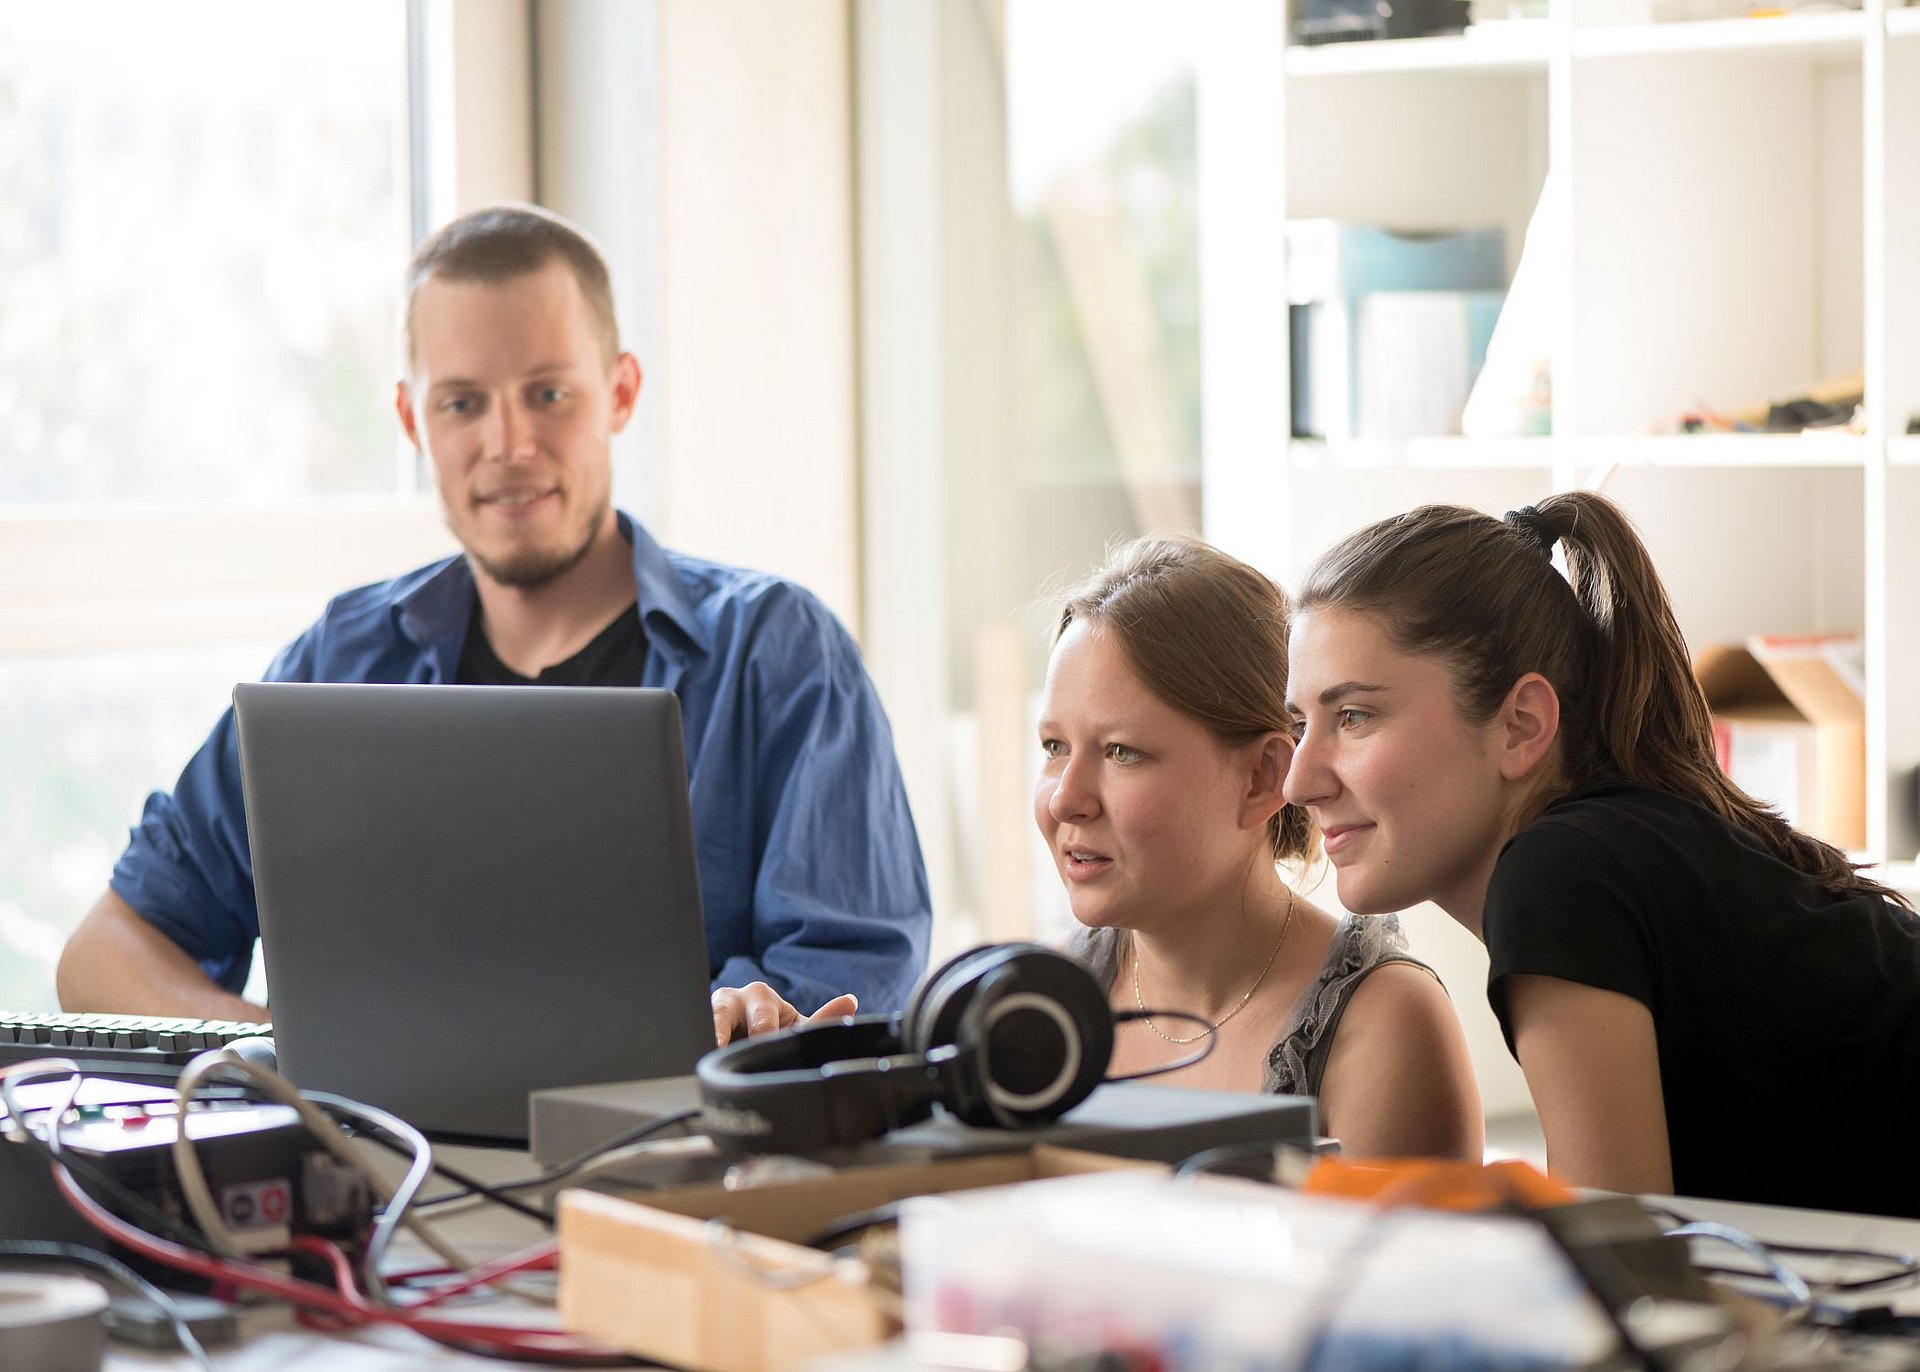 Members of the start-up KEWAZO in their workspace at the Incubator of the Entrepreneurship Center of the Technical University of Munich (TUM), working on their prototype of a scaffolding robot